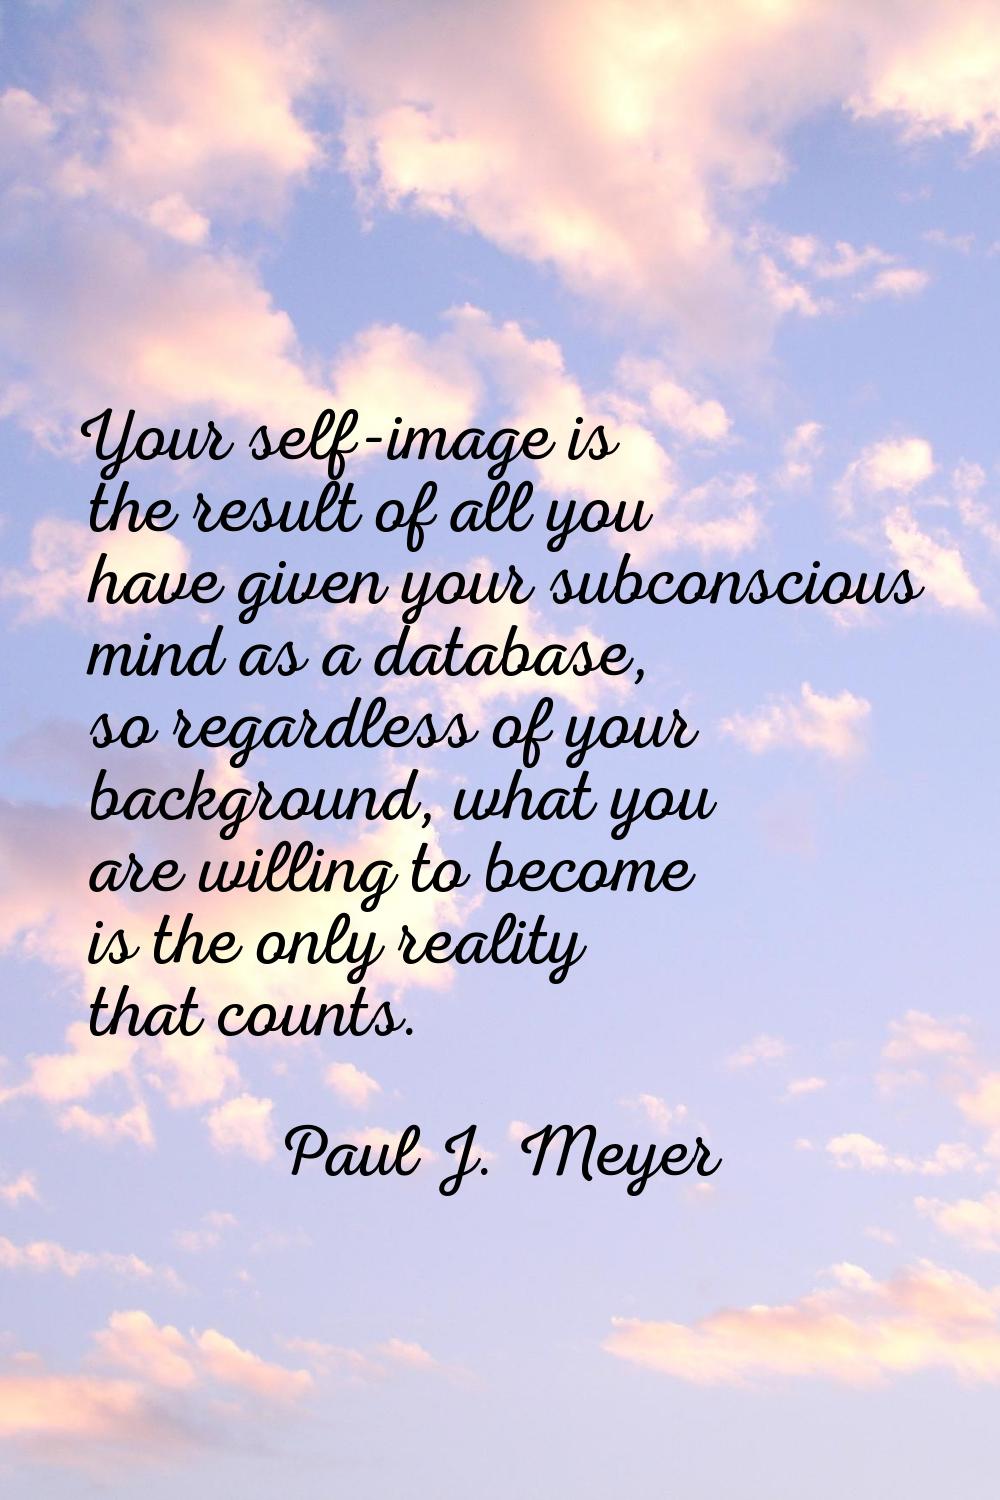 Your self-image is the result of all you have given your subconscious mind as a database, so regard